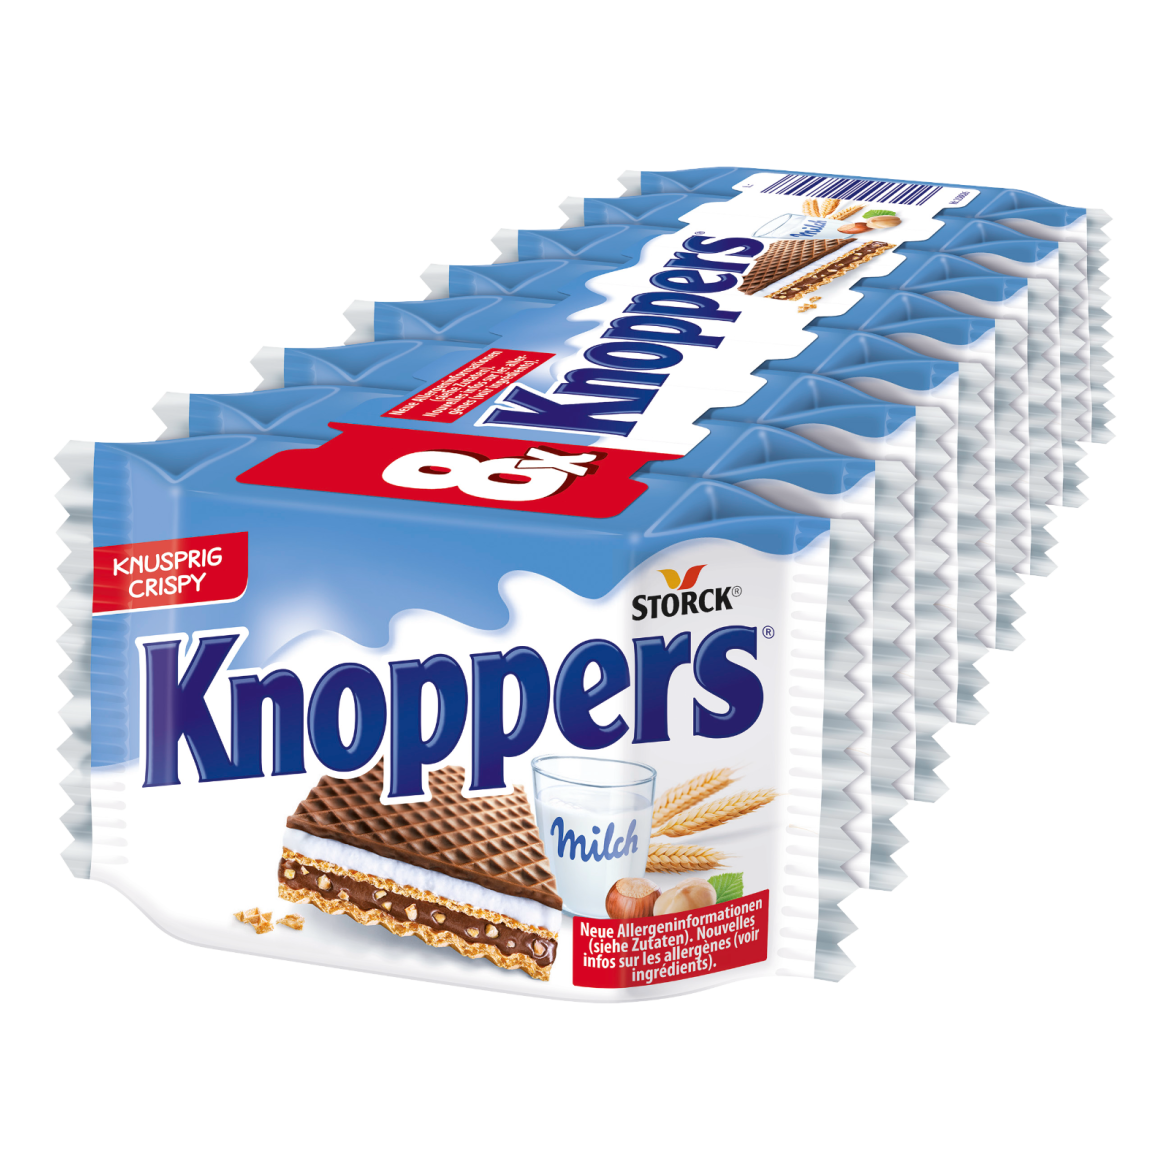 Knoppers 8-pack